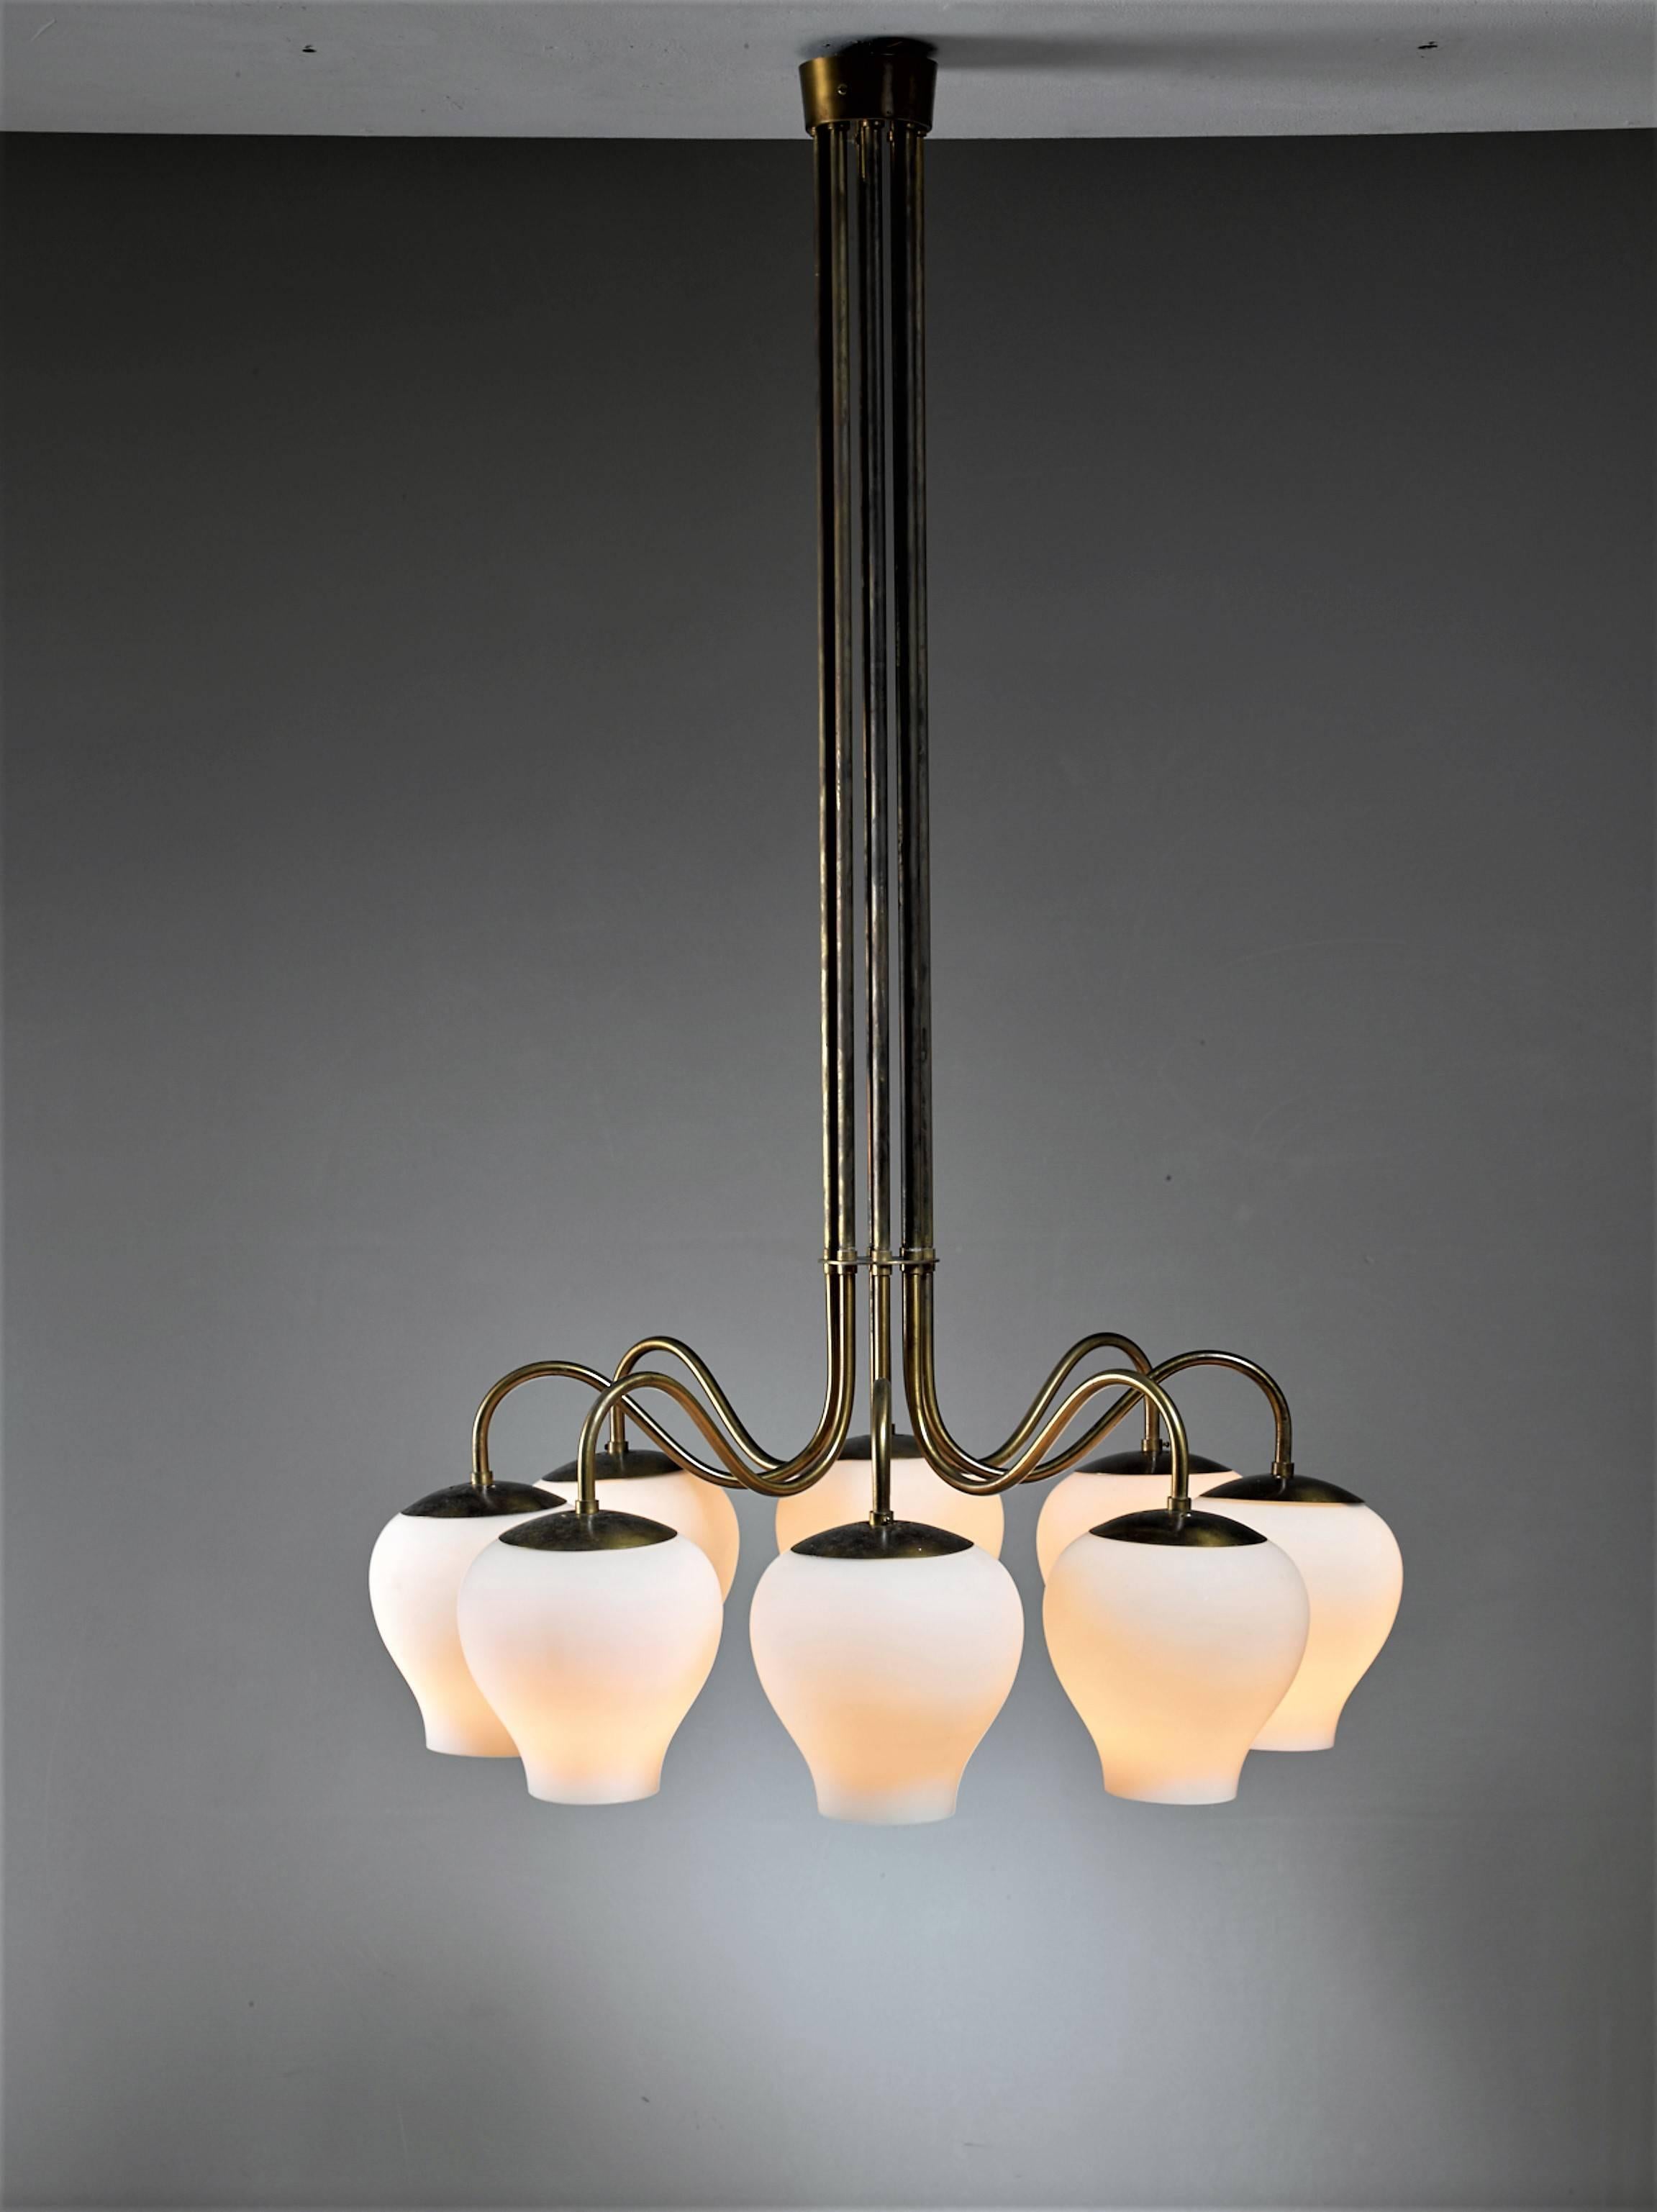 A rare pair 1940s 'Gatling' chandeliers by ASEA Belysning, Sweden. The brass stems form a bundle a the top and curve out at the bottom to hold eight opaline glass shades.
